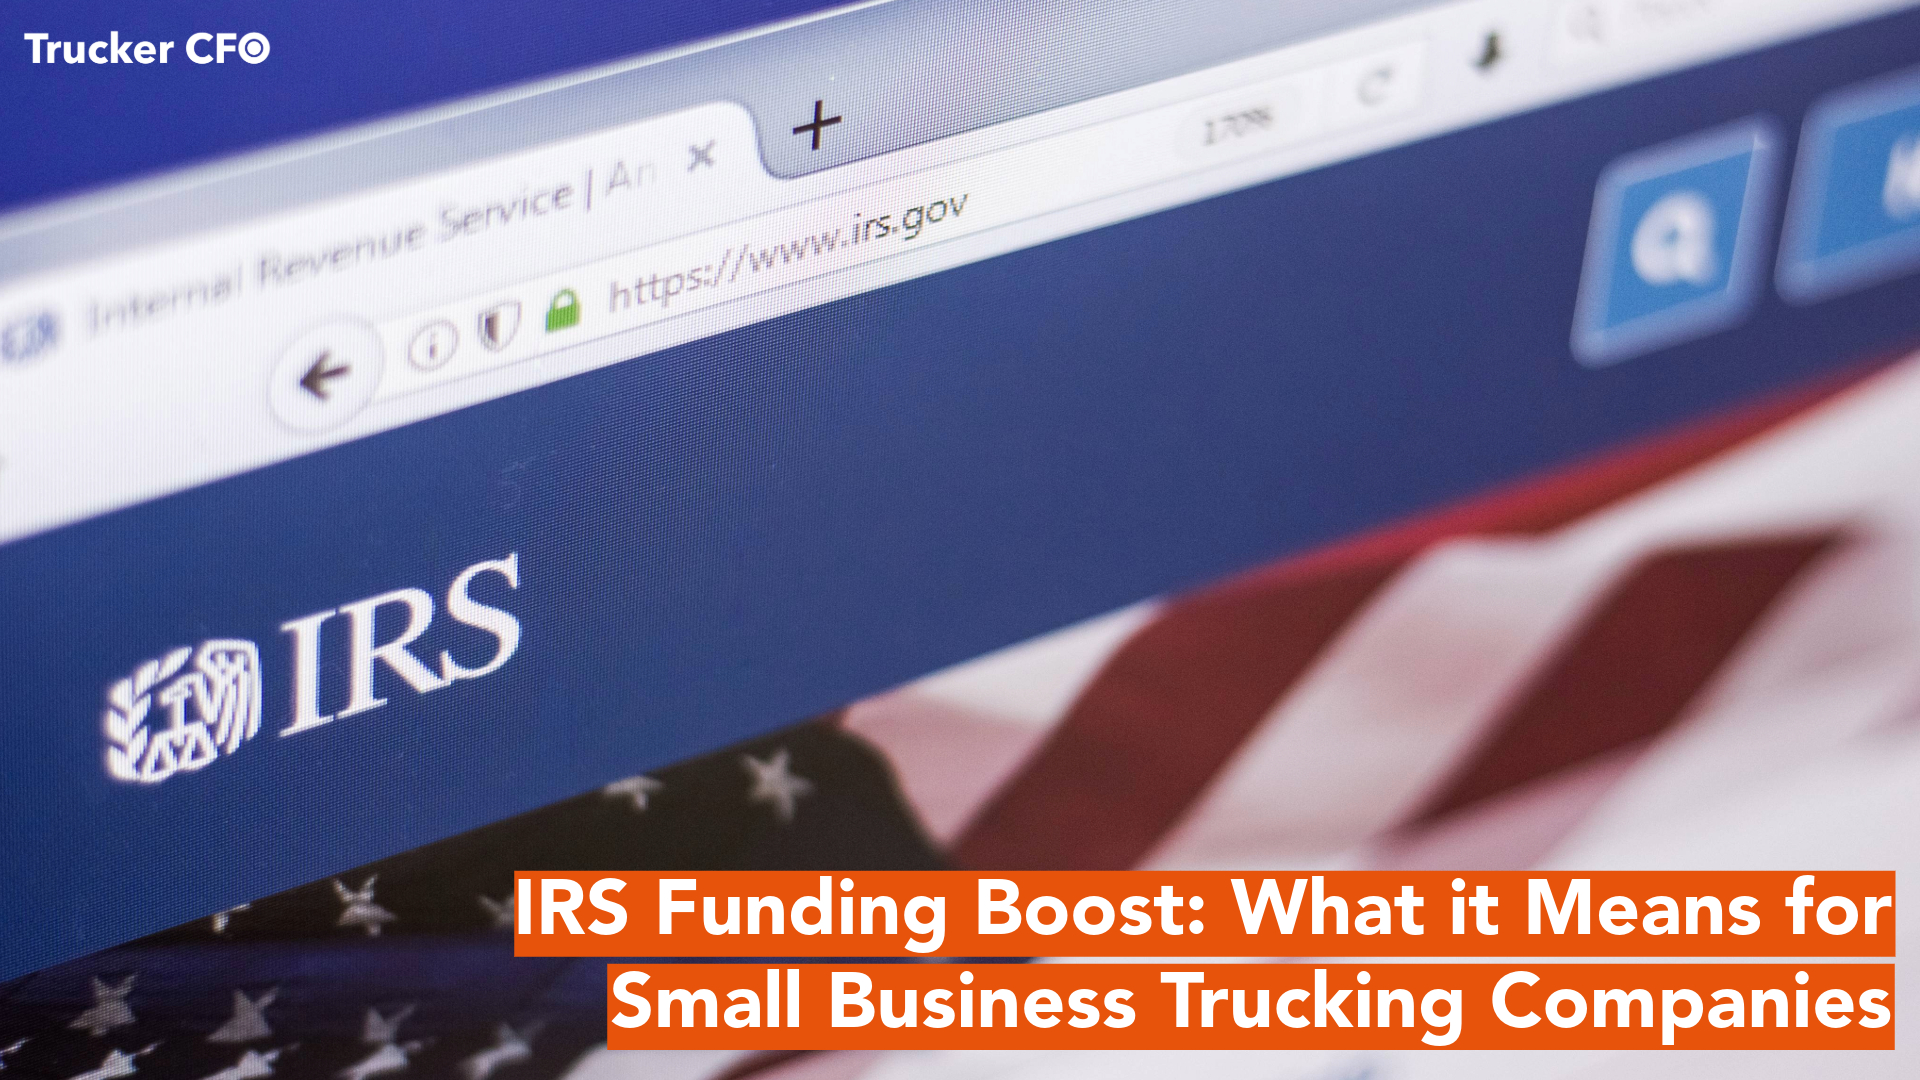 IRS Funding Boost: What it Means for Small Business Trucking Companies